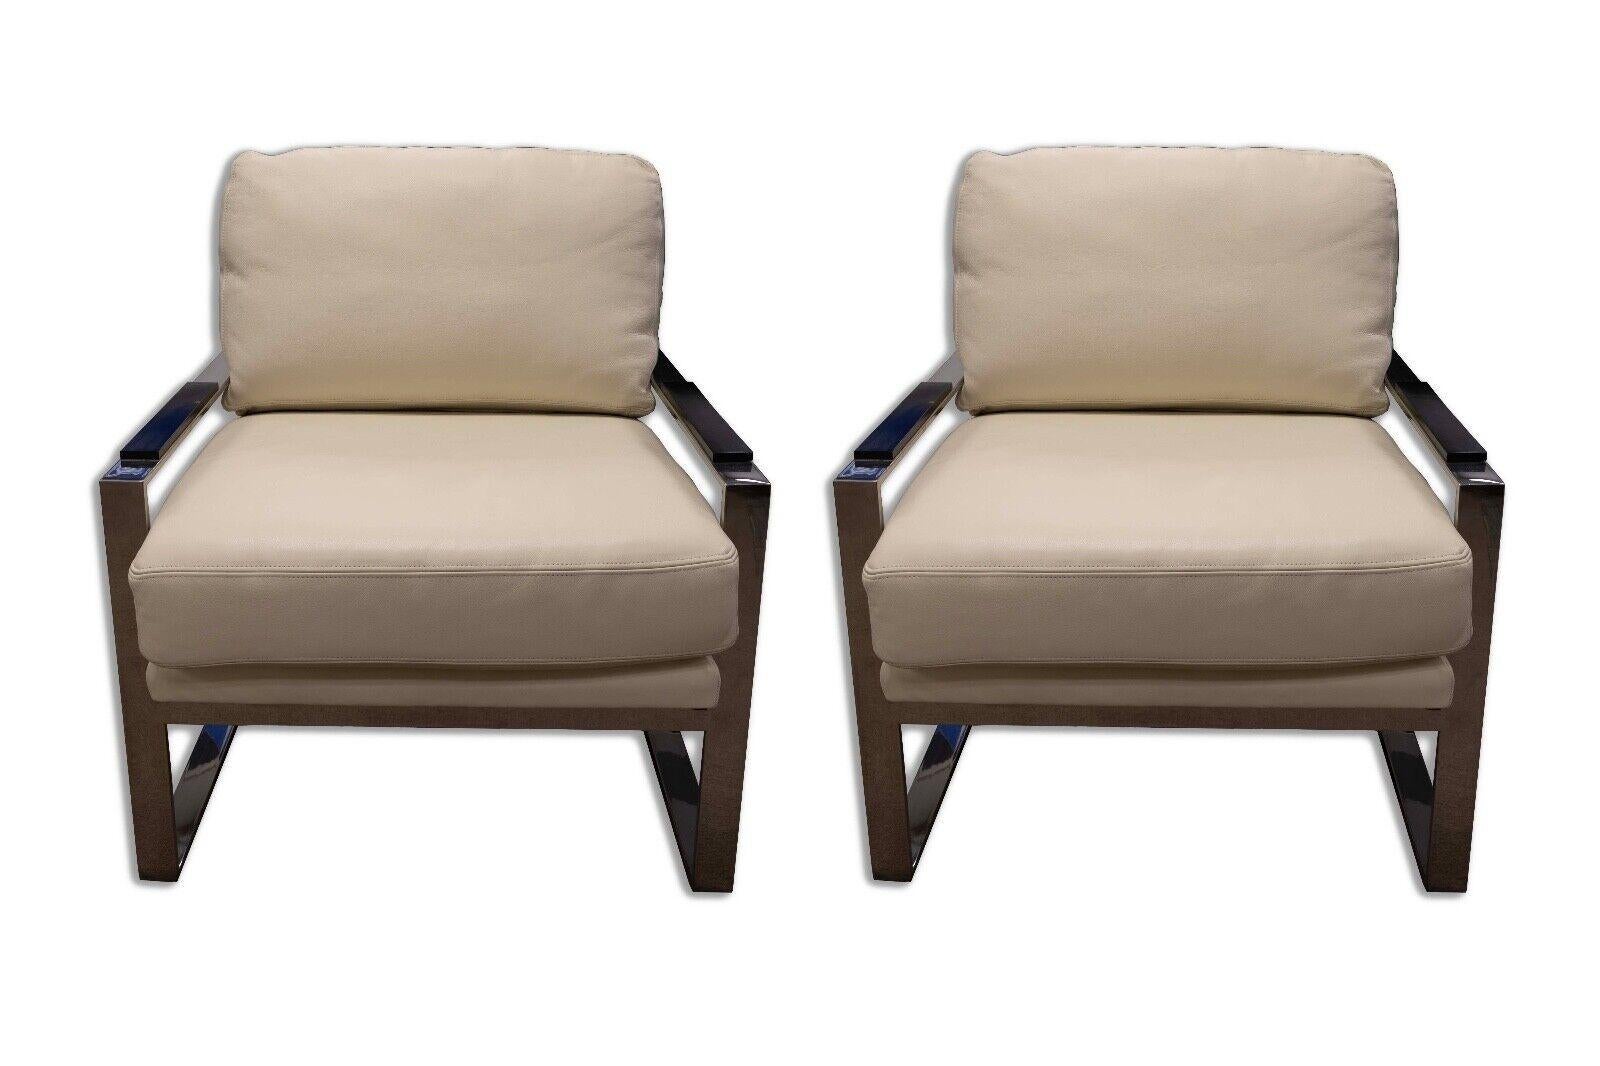 Presented is a pair of Cy Mann style chairs, part of the Modernism Michael Weiss Collection by Vanguard Furniture. These chairs boast a contemporary design with a sleek combination of off white upholstery and dark, angular wooden arm rests. The